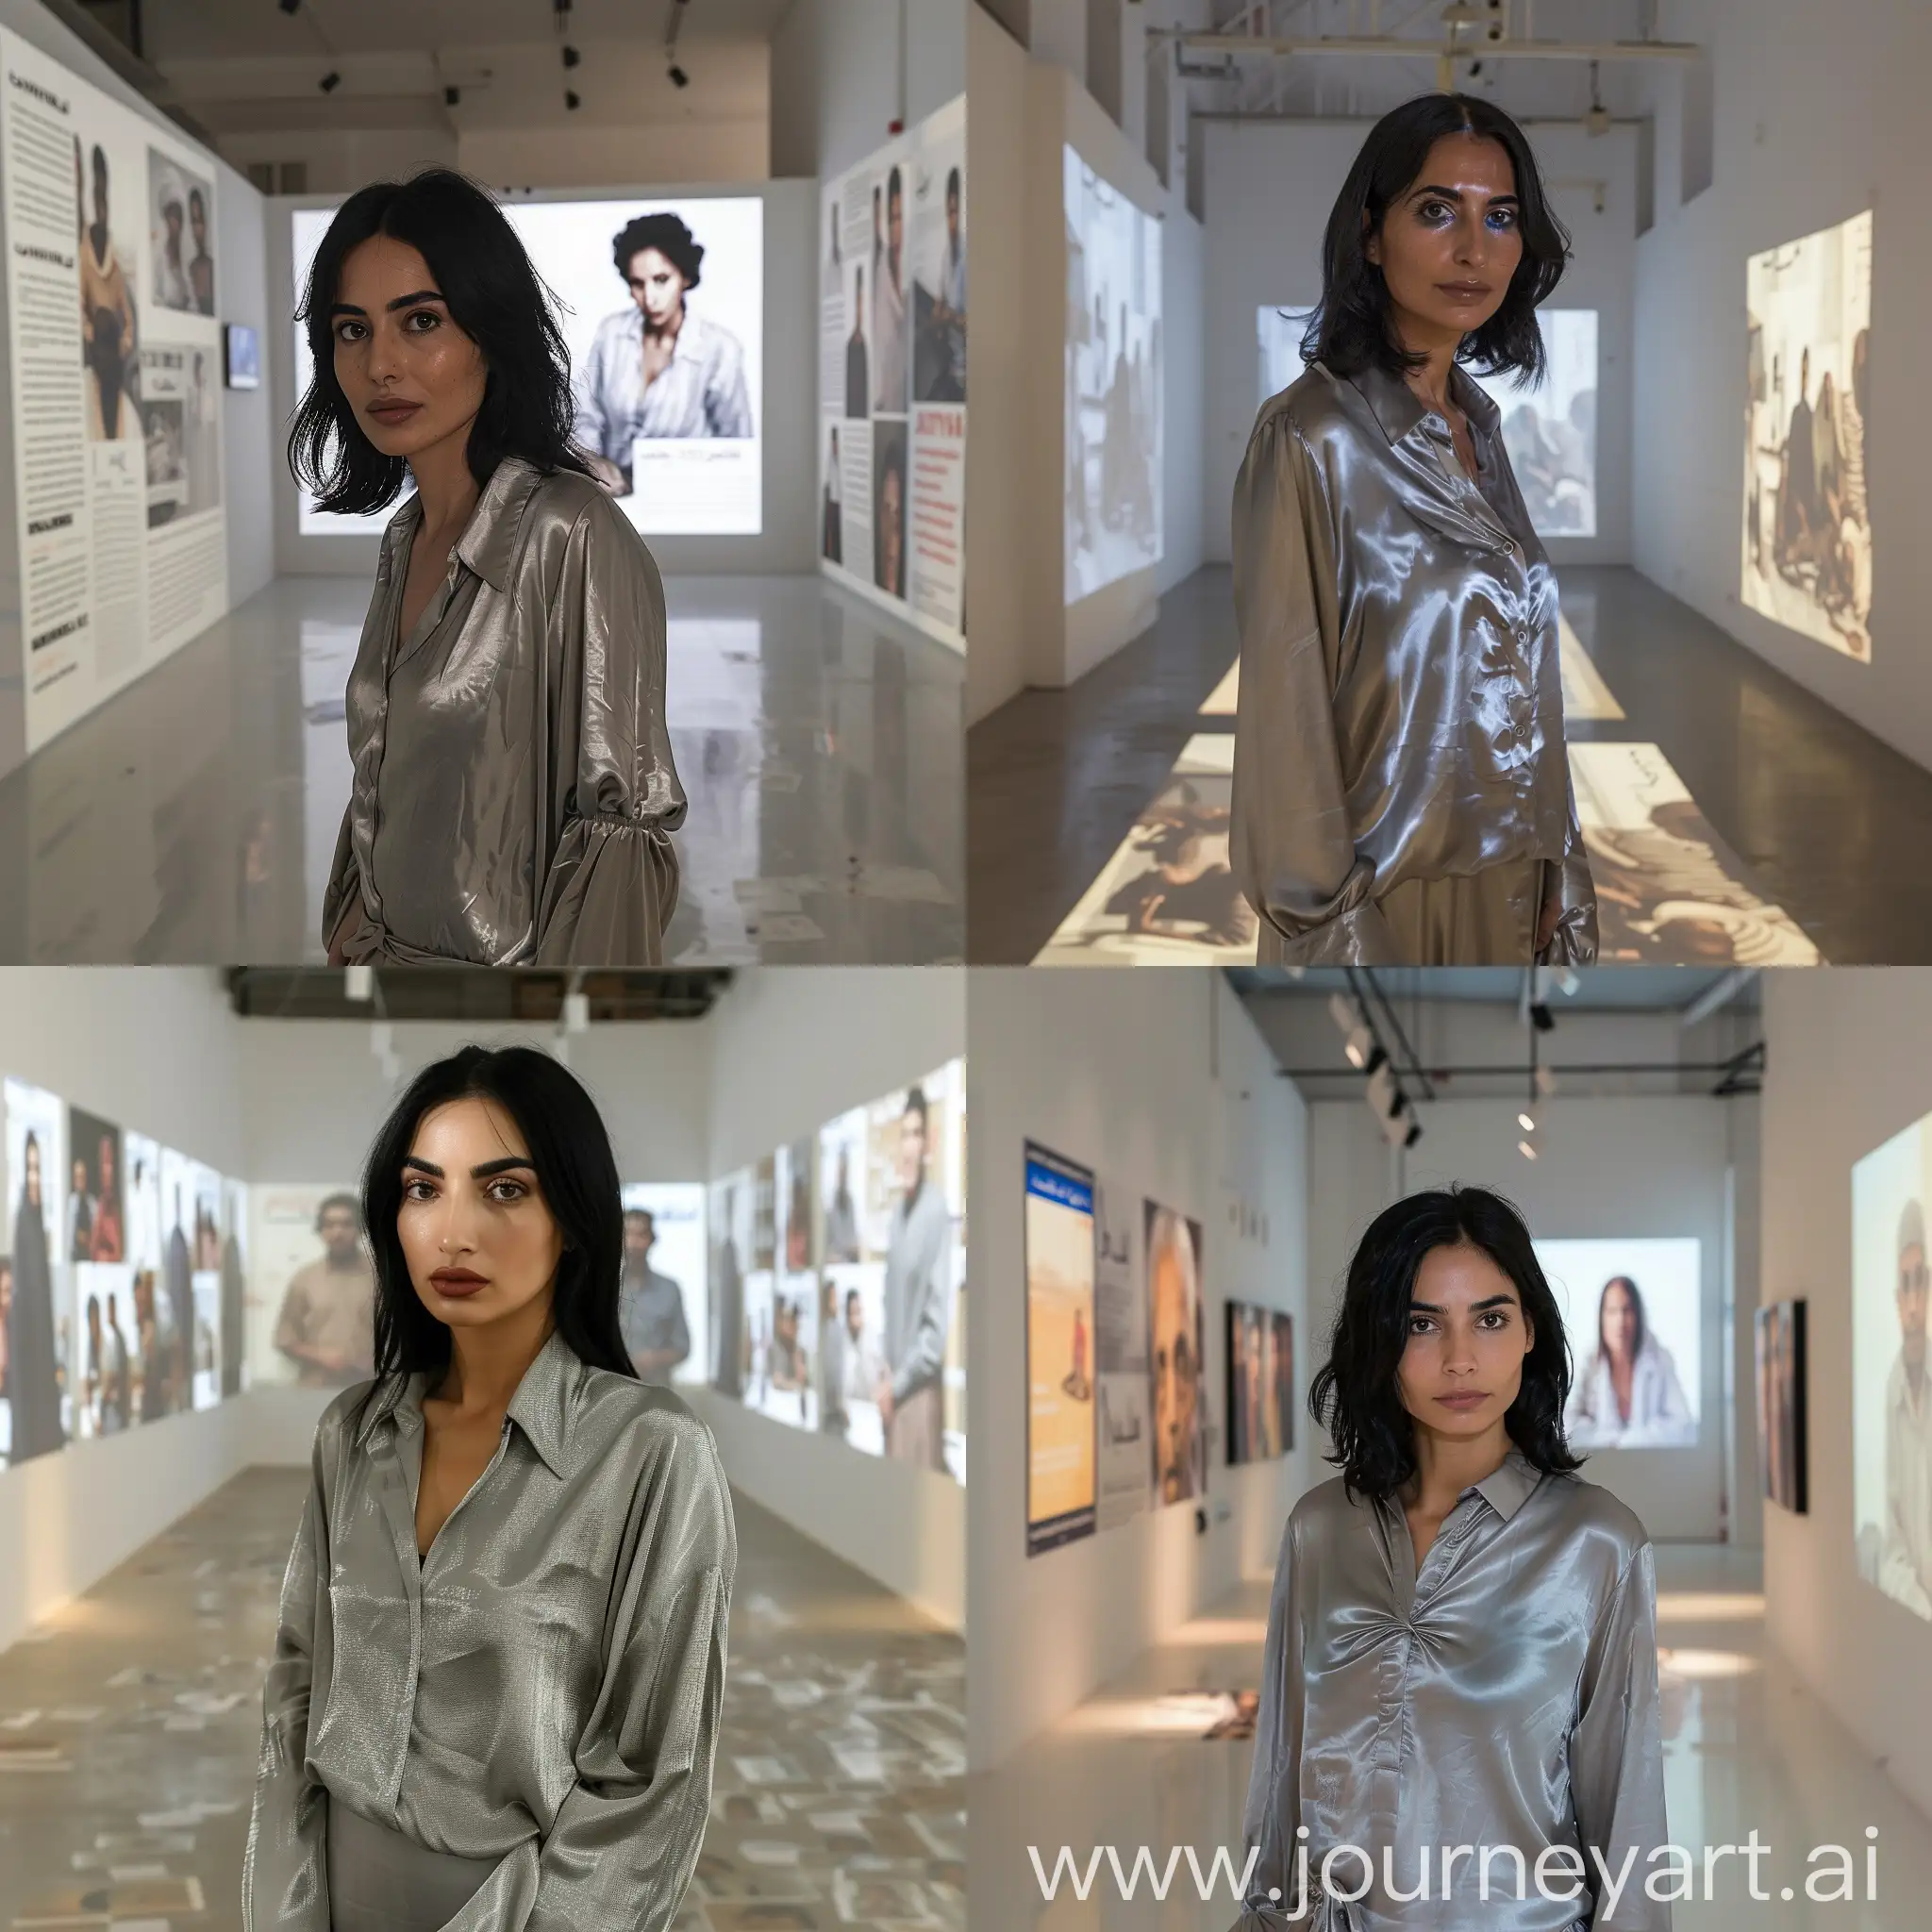 Empathetic-Arab-Woman-Surrounded-by-Tunisian-Poverty-Projections-in-Gallery